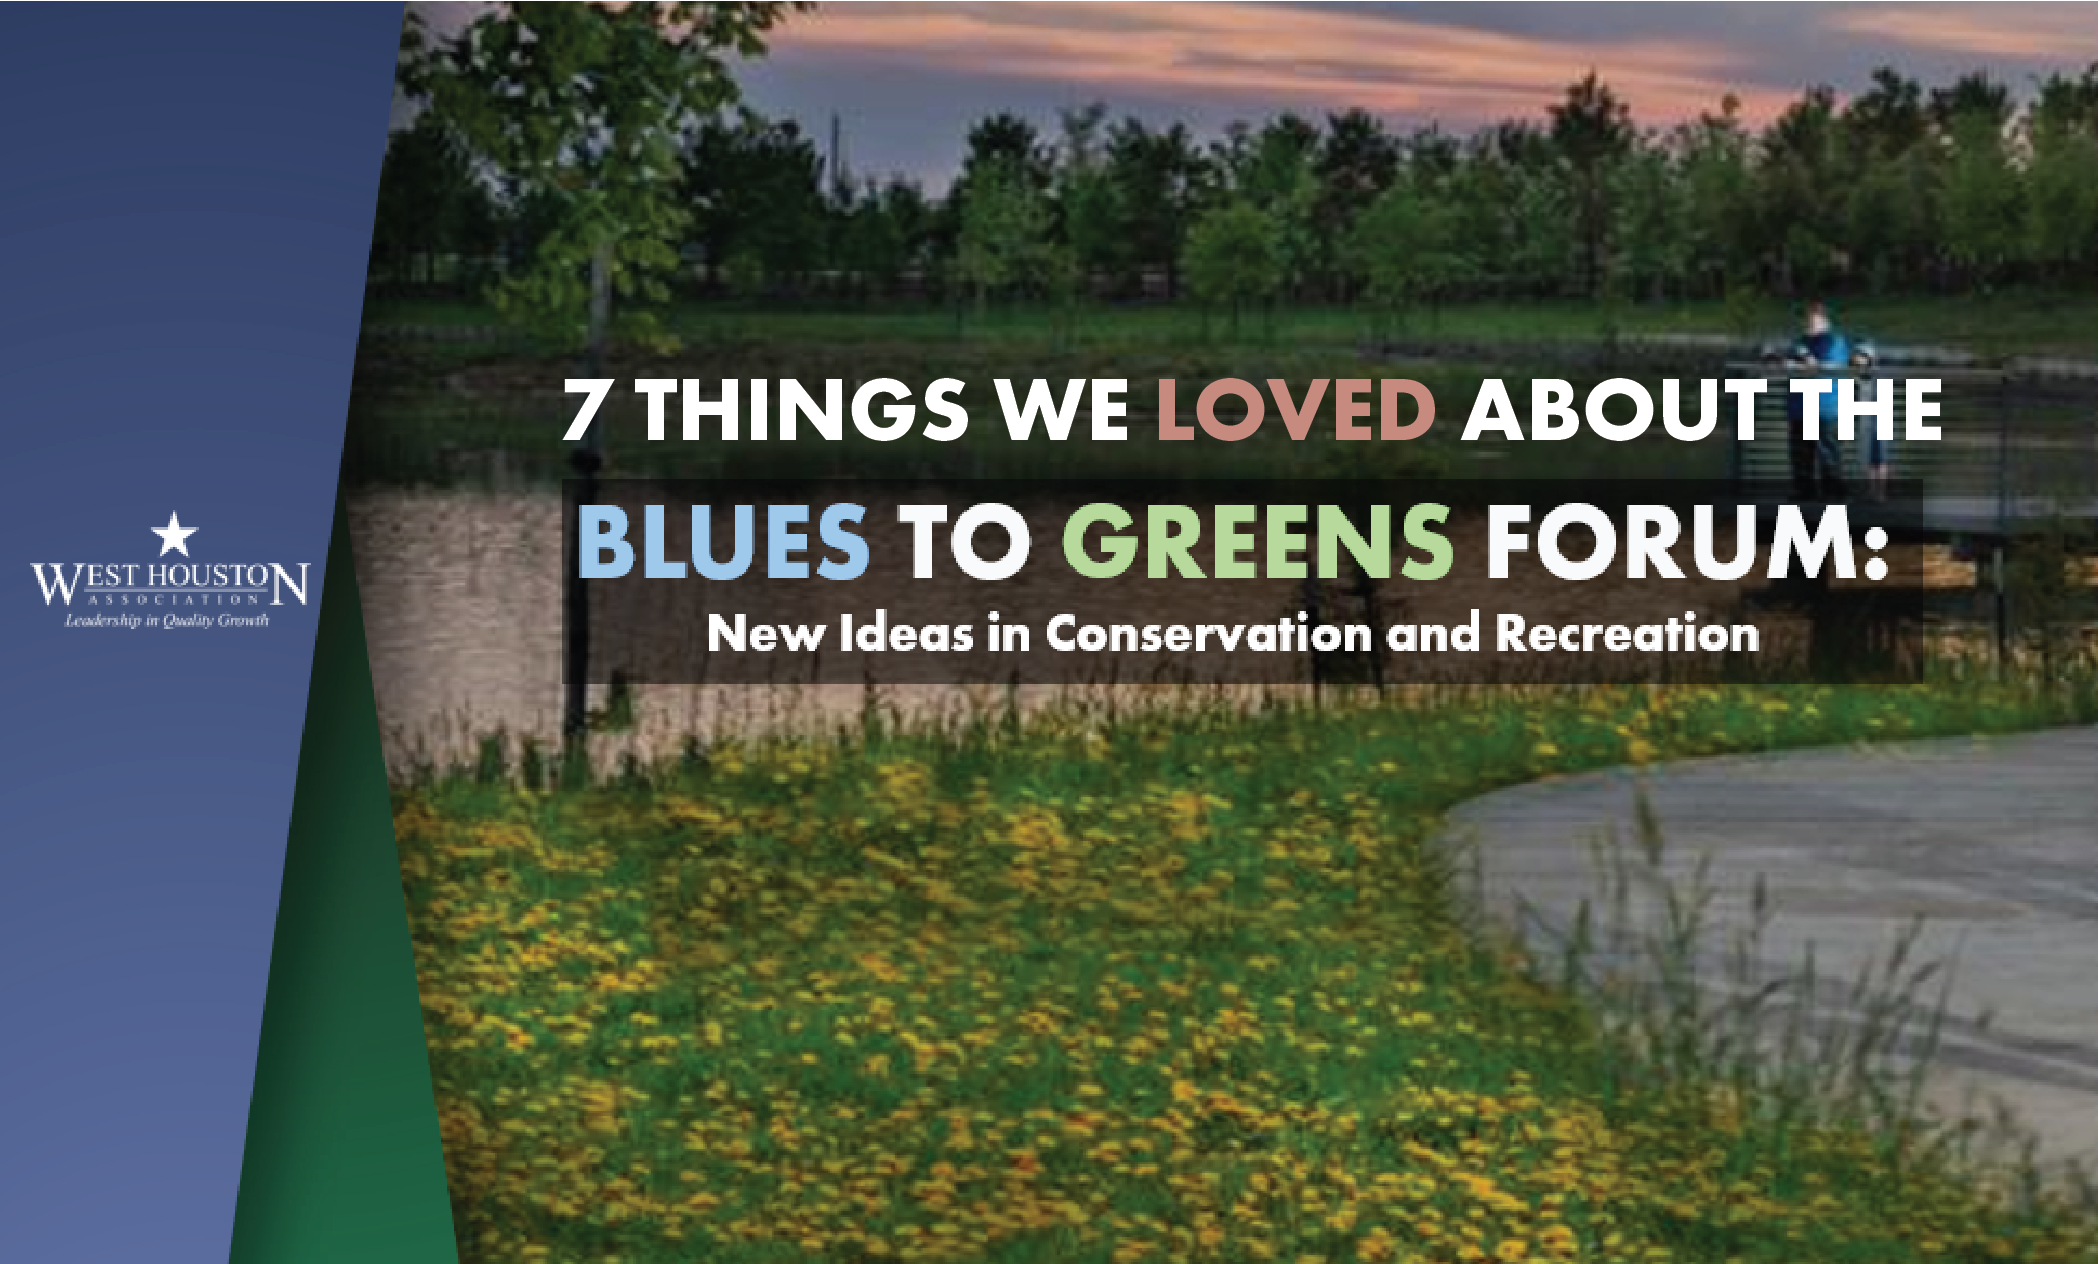 7 Things We Loved About the Blues to Greens Forum